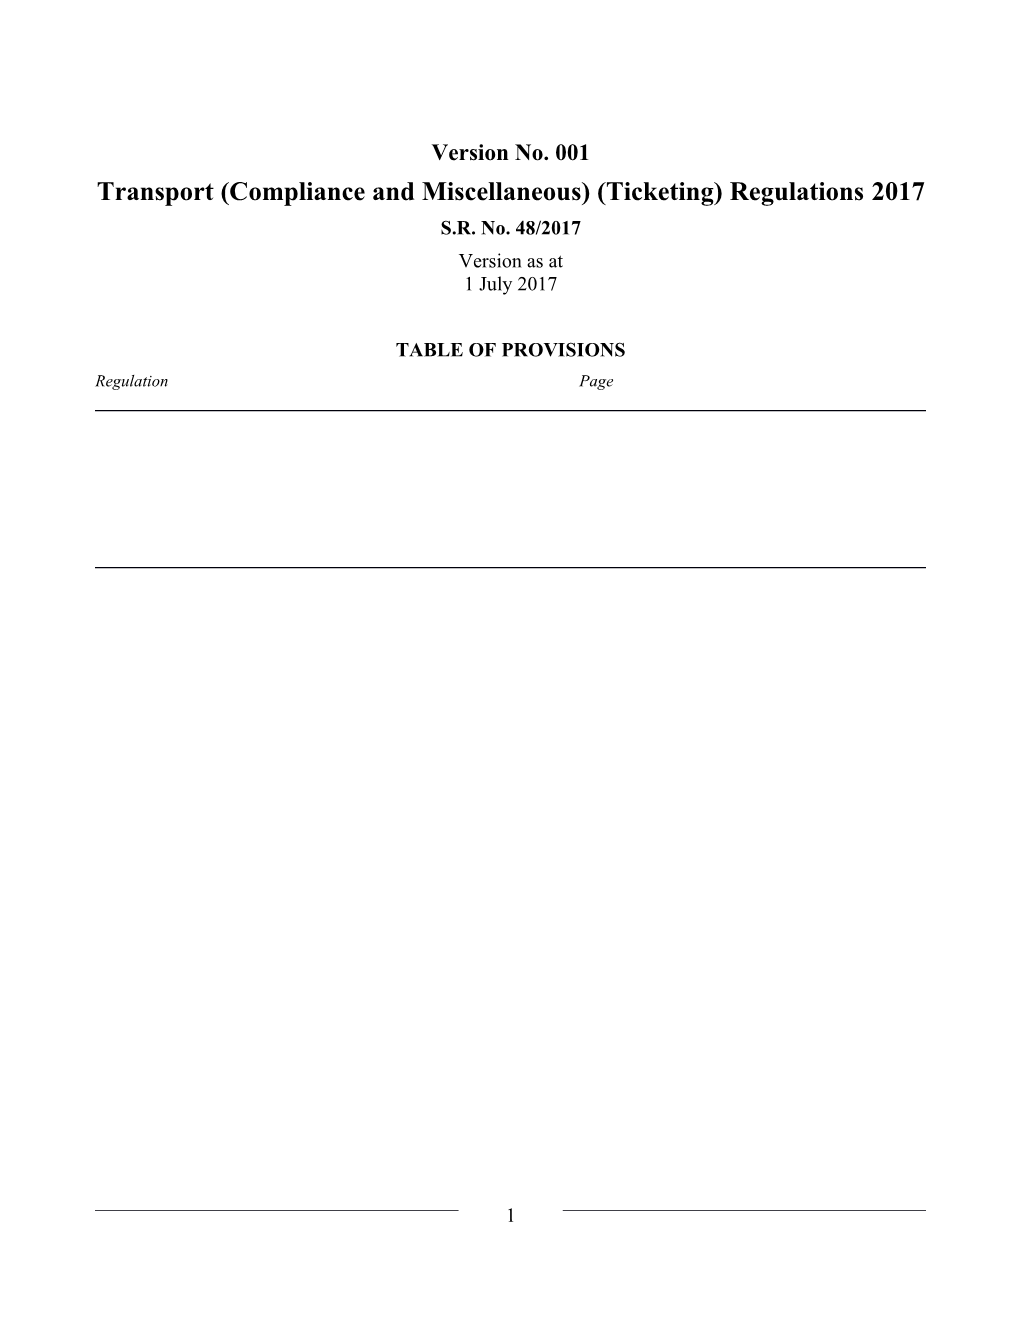 Transport (Compliance and Miscellaneous) (Ticketing) Regulations 2017